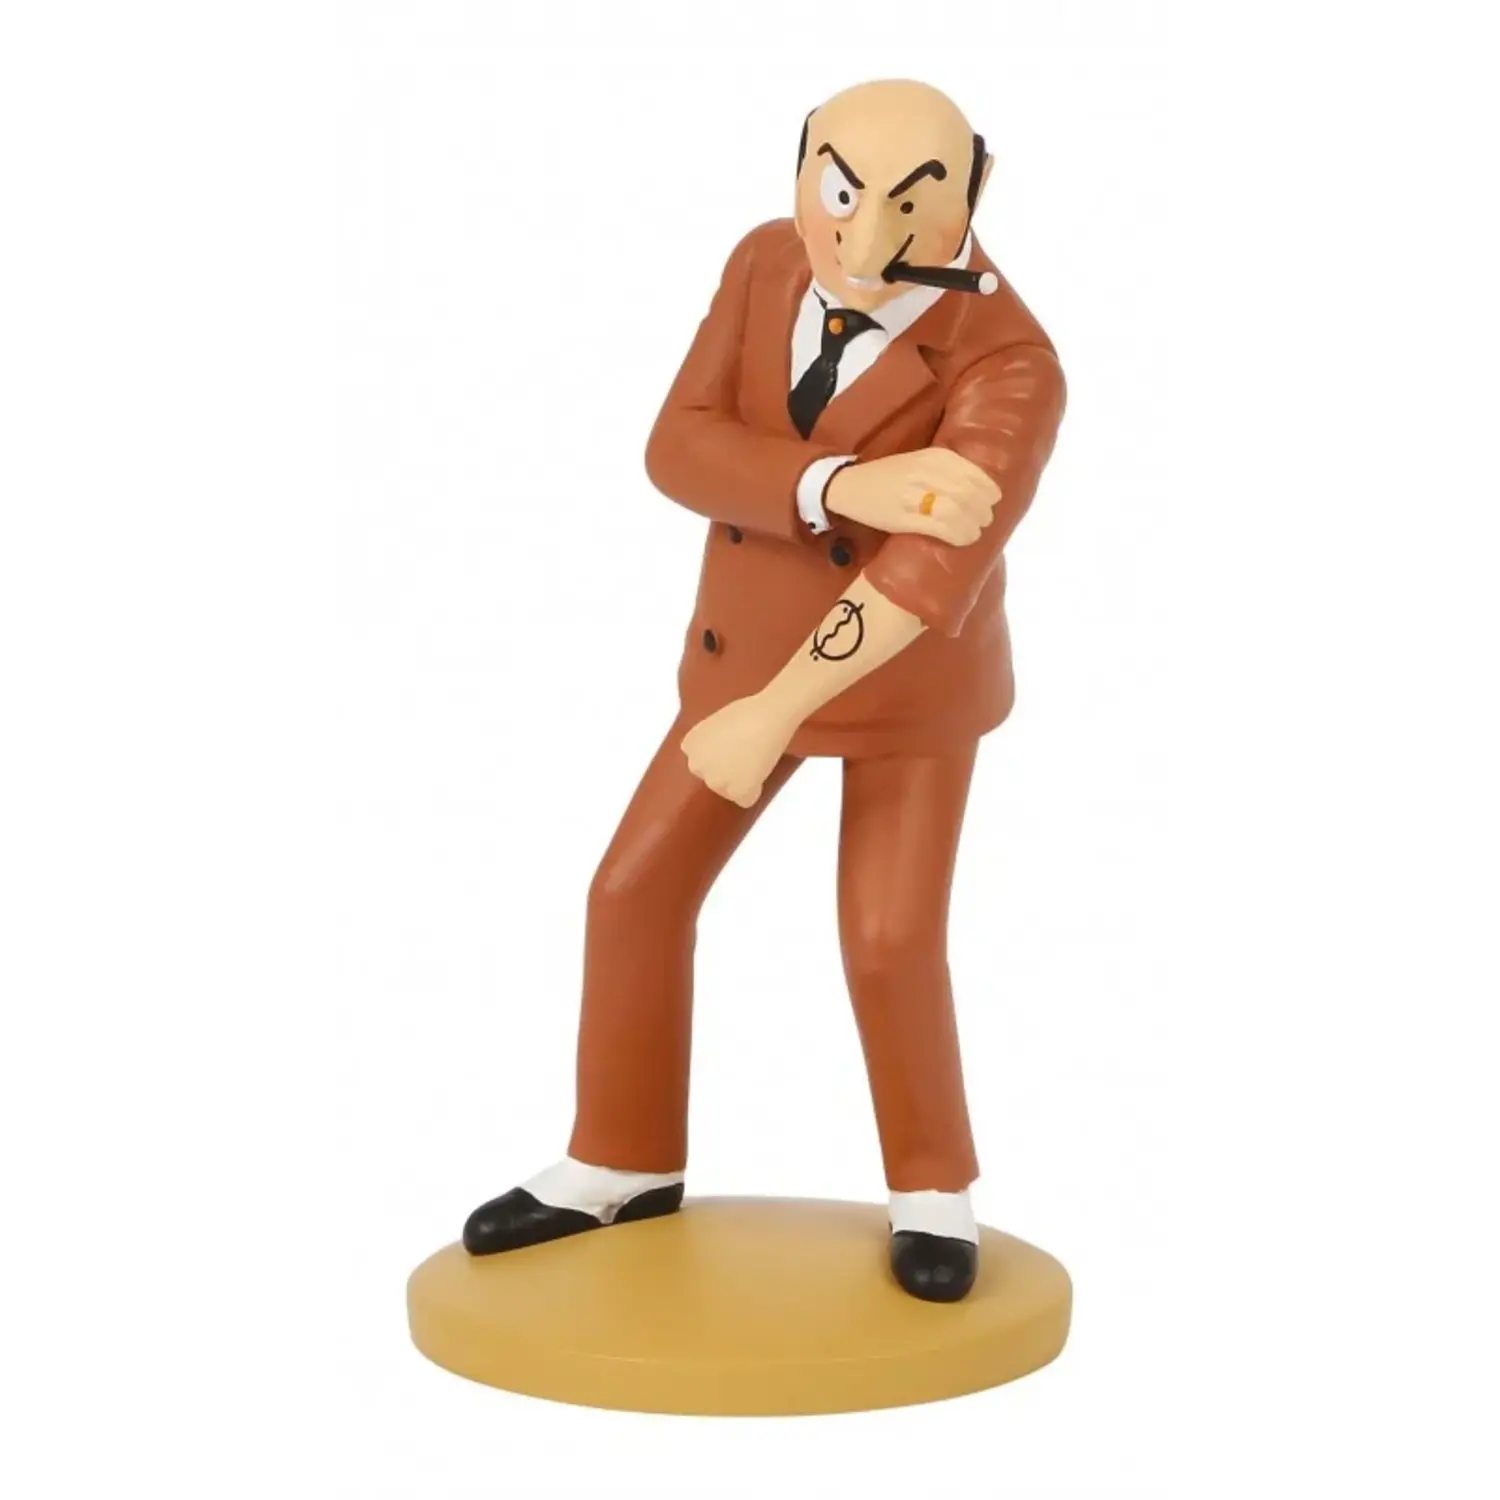 Moulinsart Collection figurine Tintin Rastapopoulos holding a whip 42202  (2016)